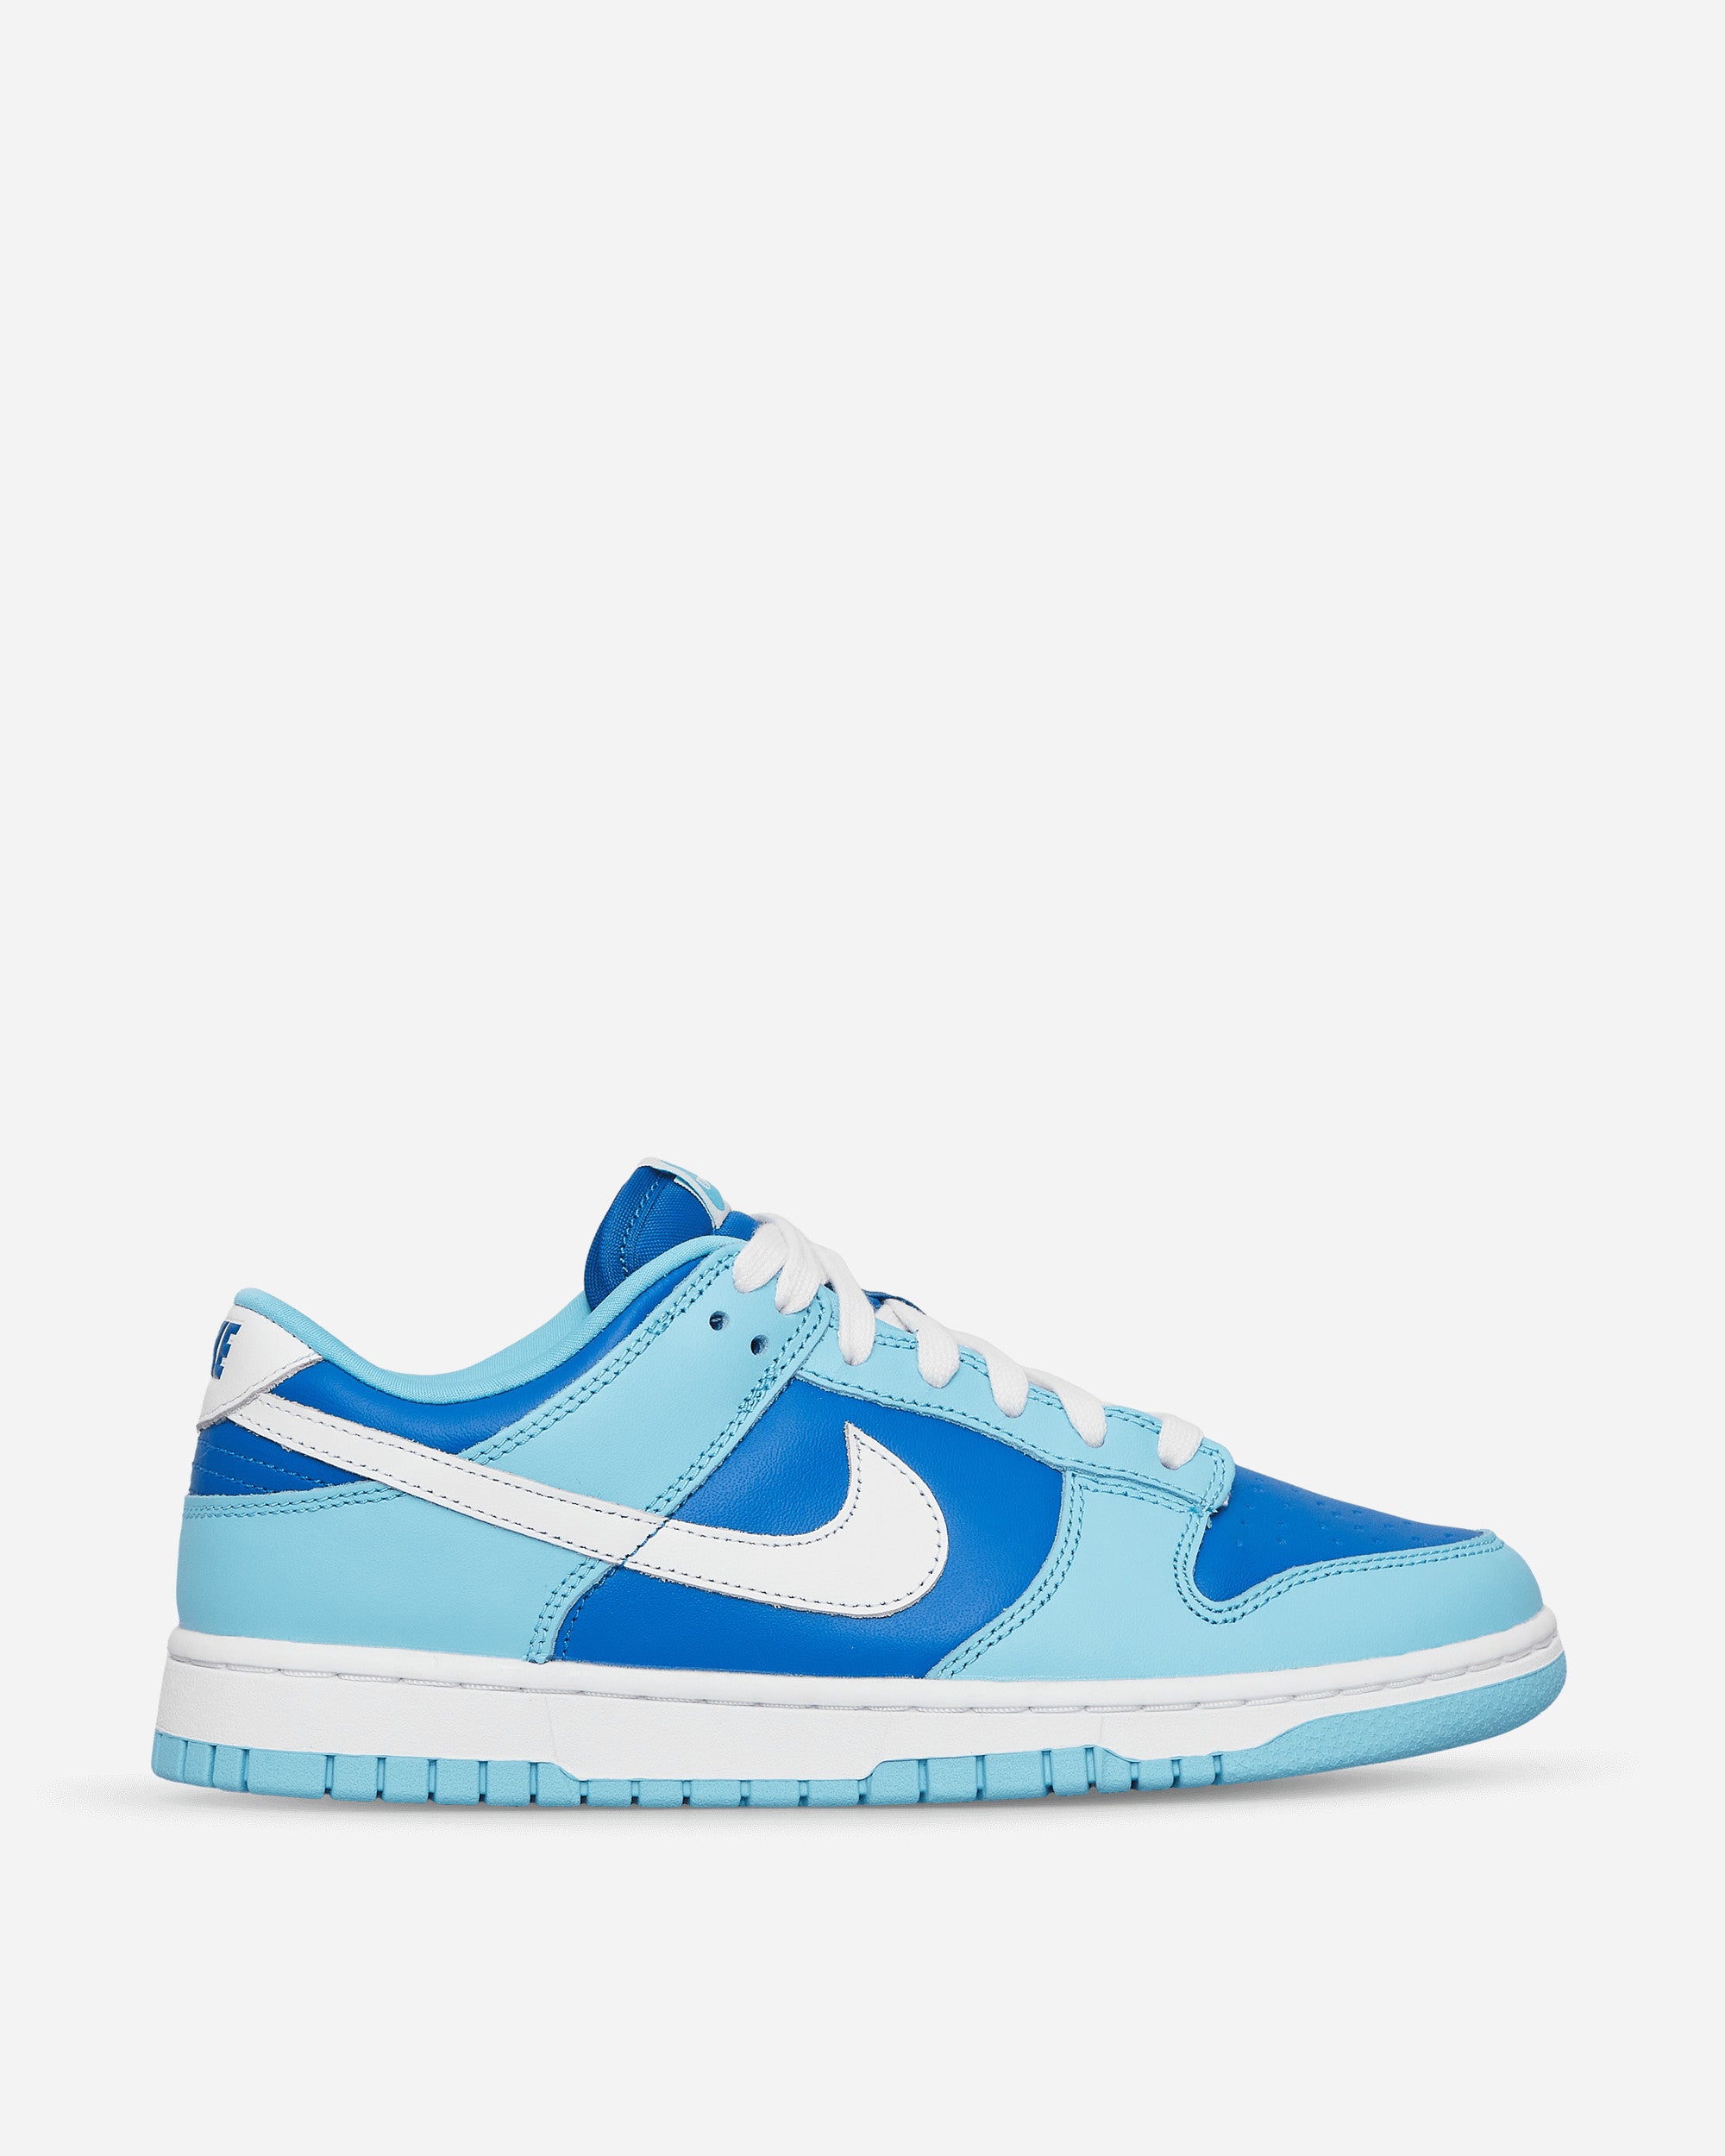 Nike Special Project Dunk Low Retro Qs Flash/White-Argon Blue Sneakers Low DM0121-400